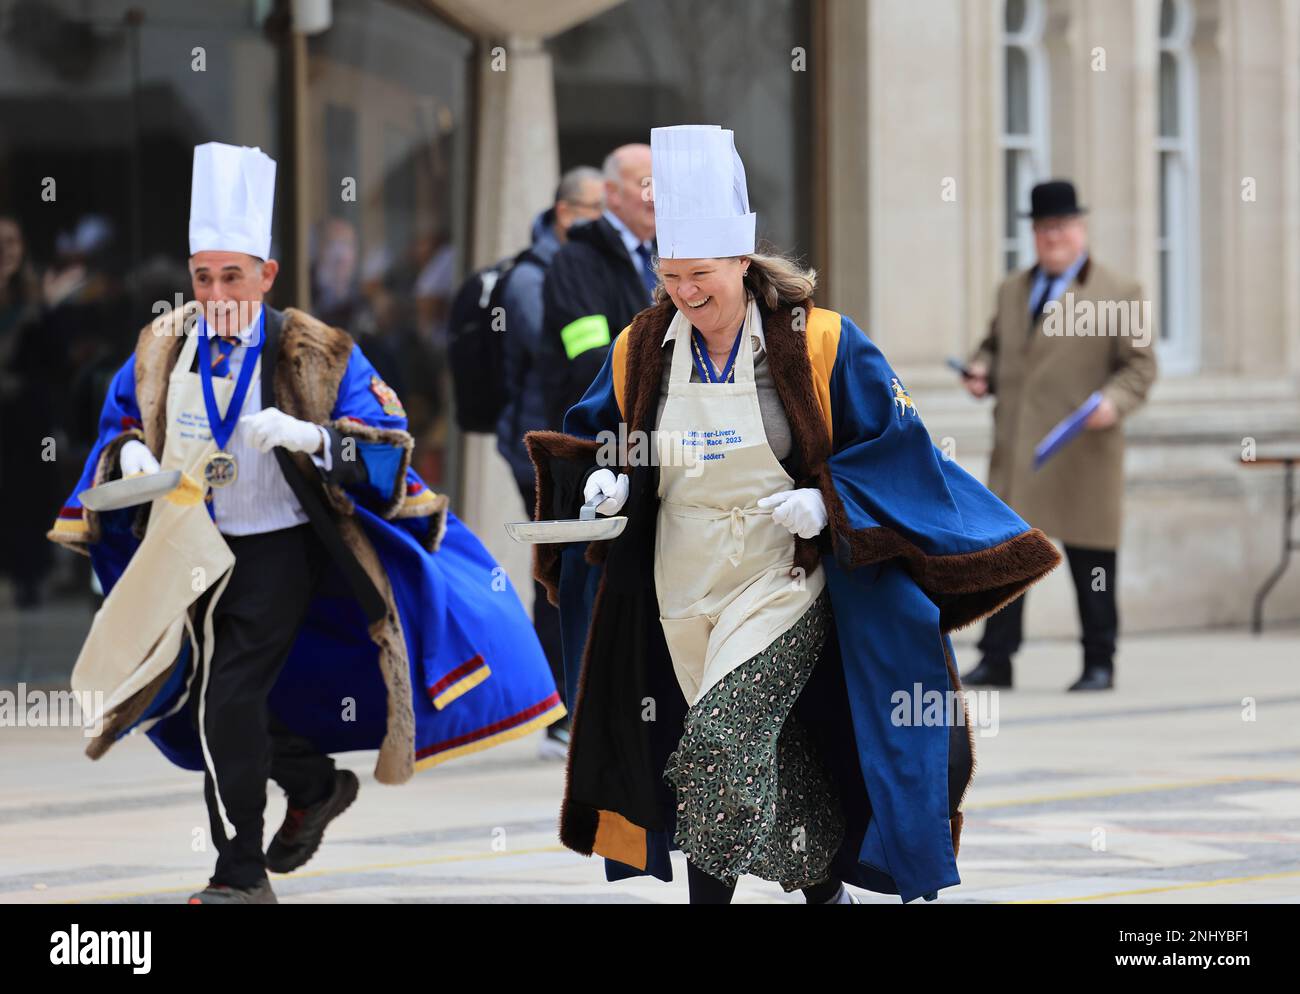 The quirky Inter Livery Pancake Race hosted by the Worshipful Company of Poulters, at Guildhall Yard, for Shrove Tuesday, 2023, in the Square Mile, London, UK Stock Photo